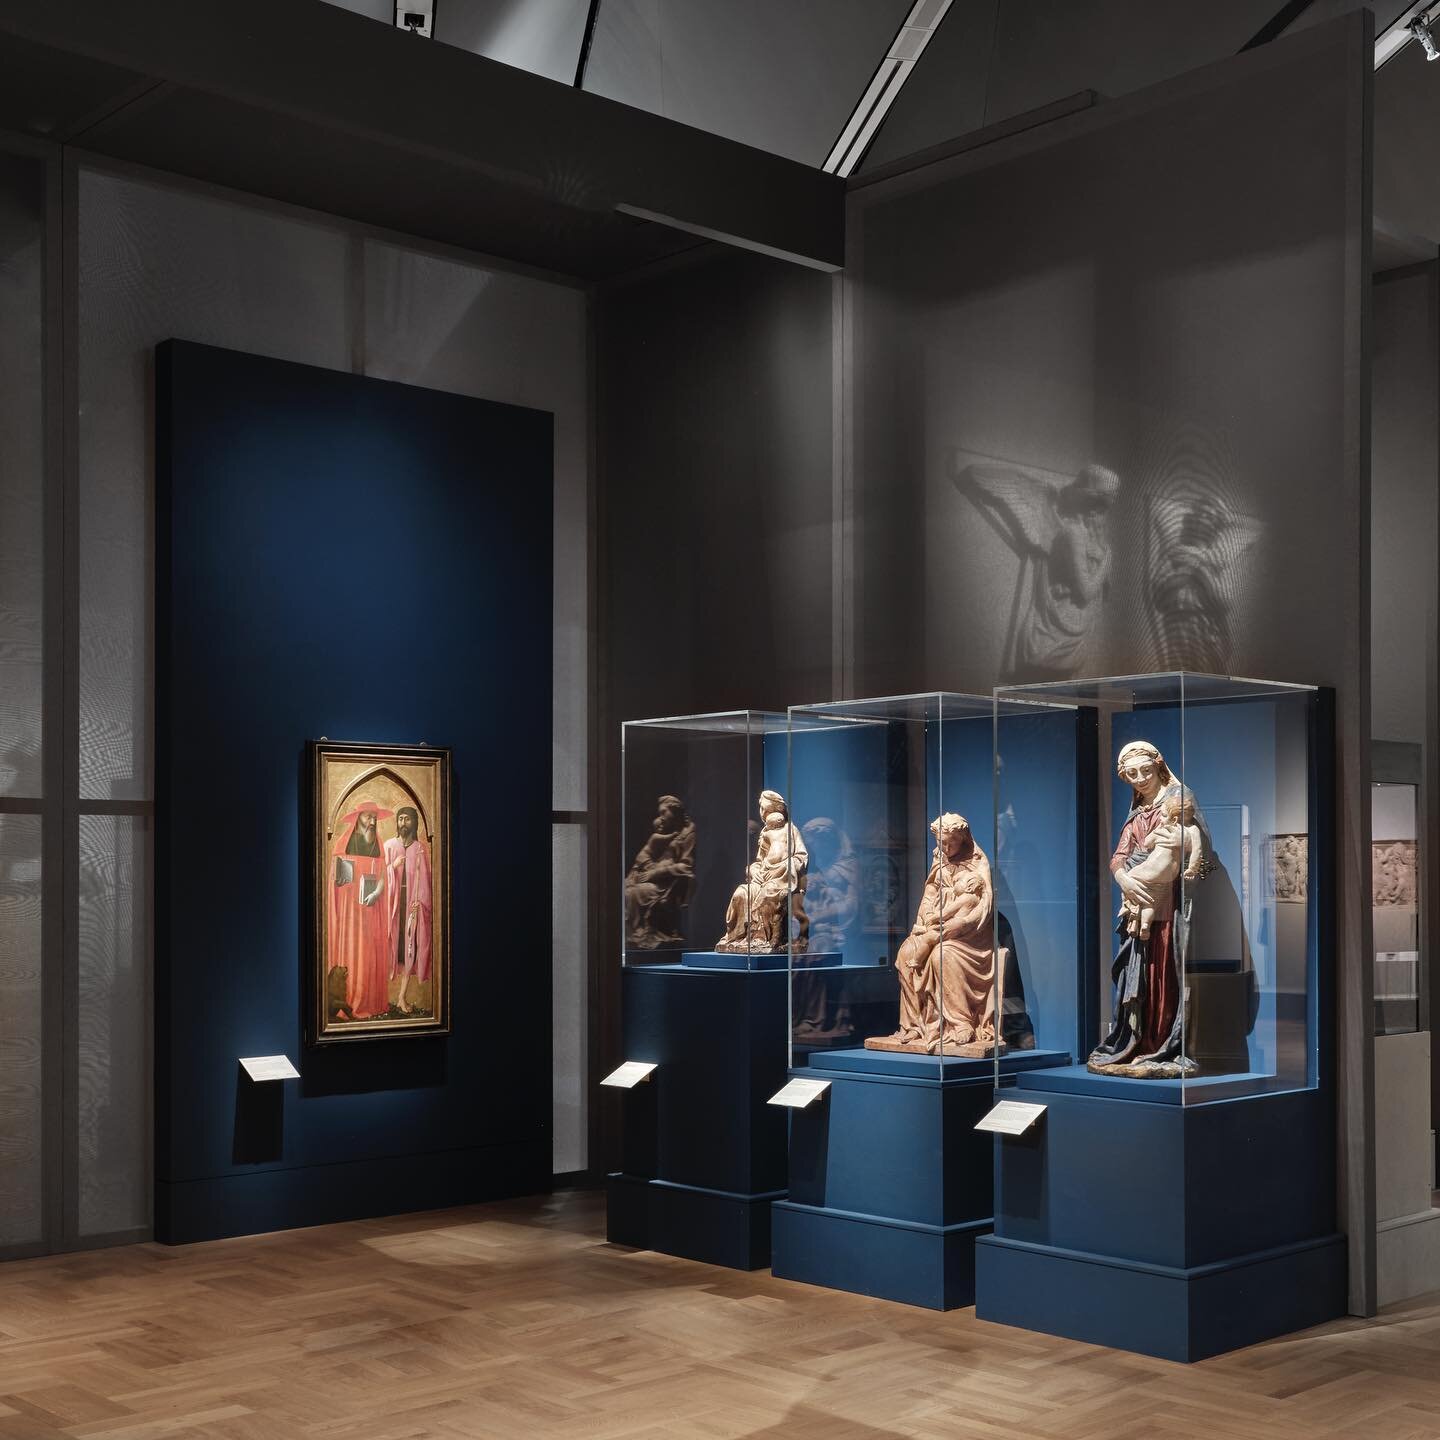 Sfumato, the renaissance art of producing softened and hazy painted forms provided a key reference to create division across the Donatello exhibition. Large scale fabric panels not only rendered architectural motifs but also provided a sustainable al